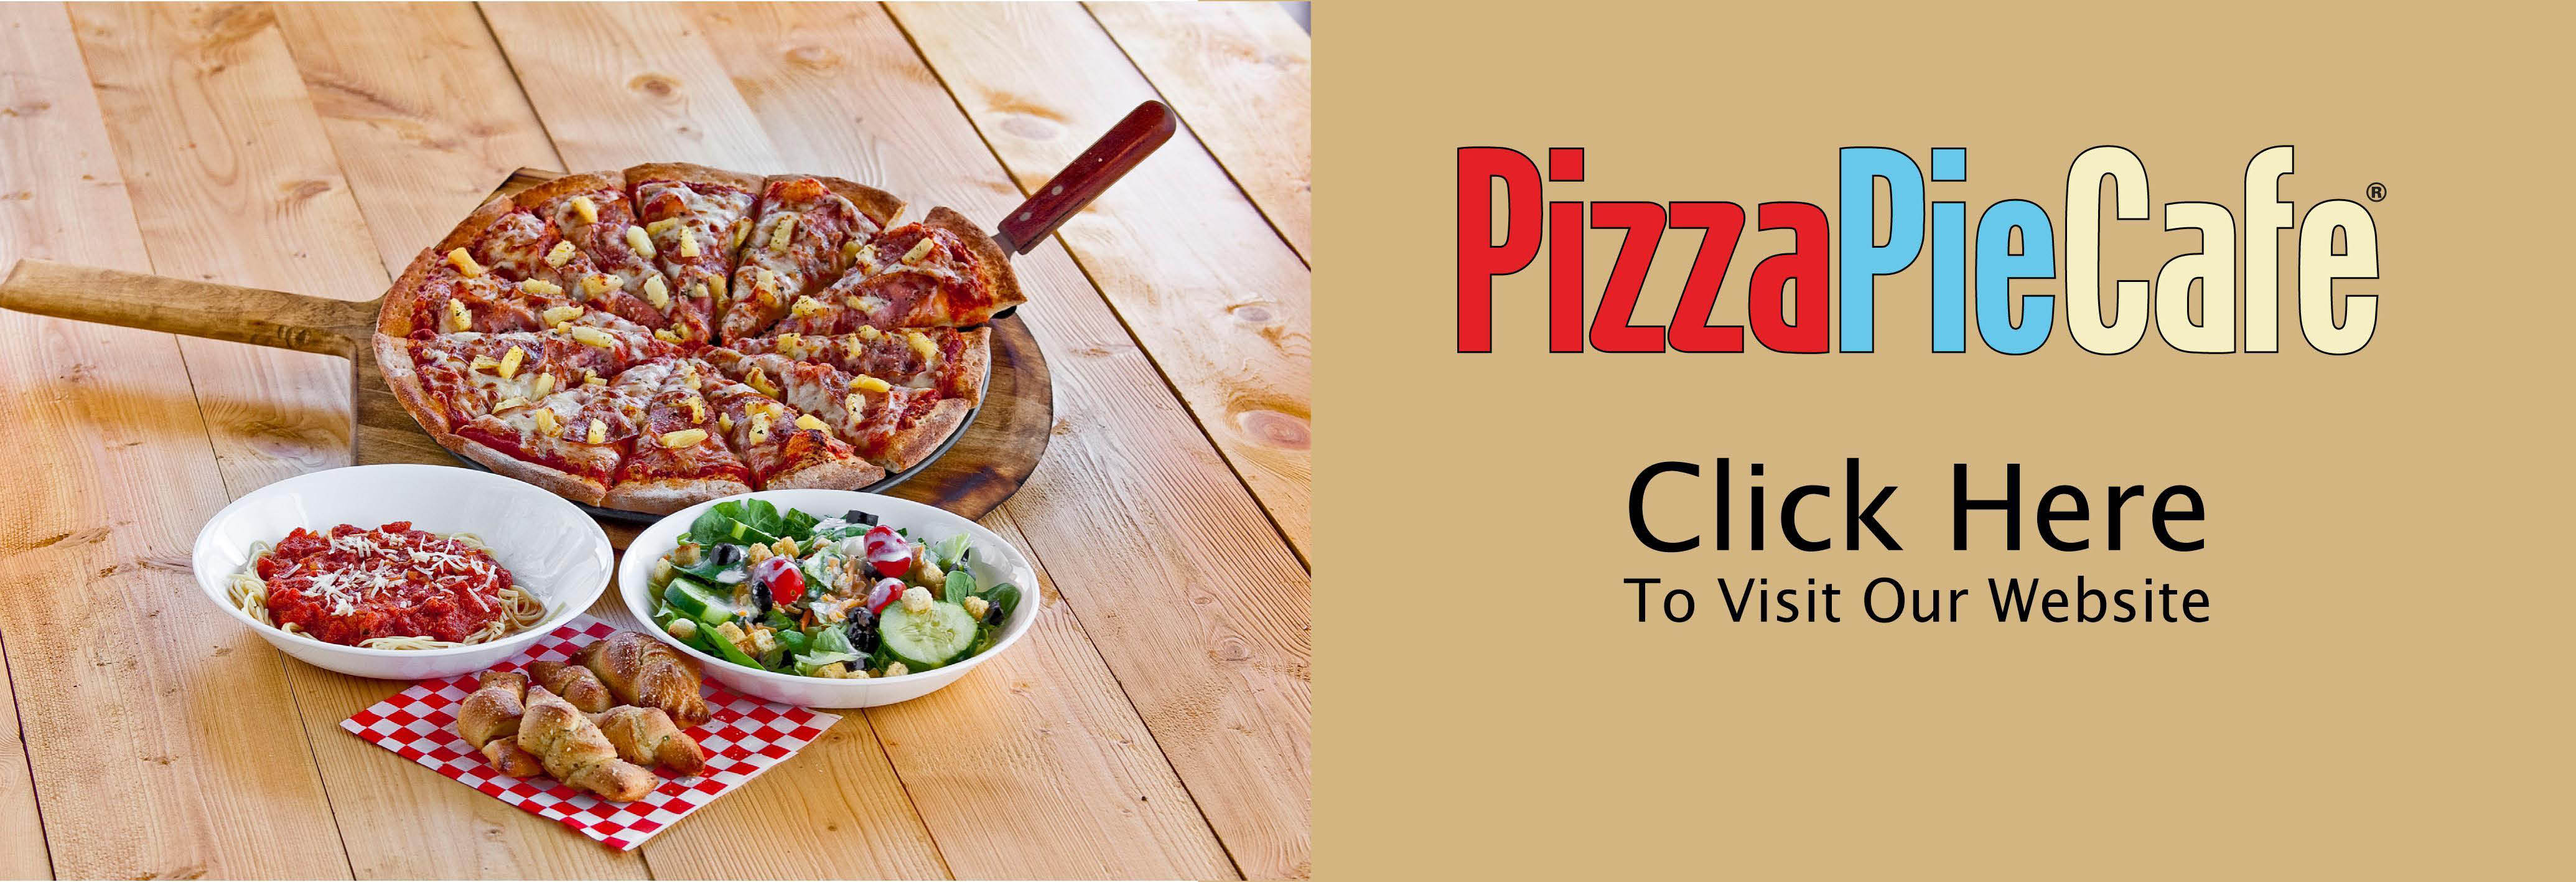 PIZZA PIE CAFE in Ogden, UT Local Coupons April 2020